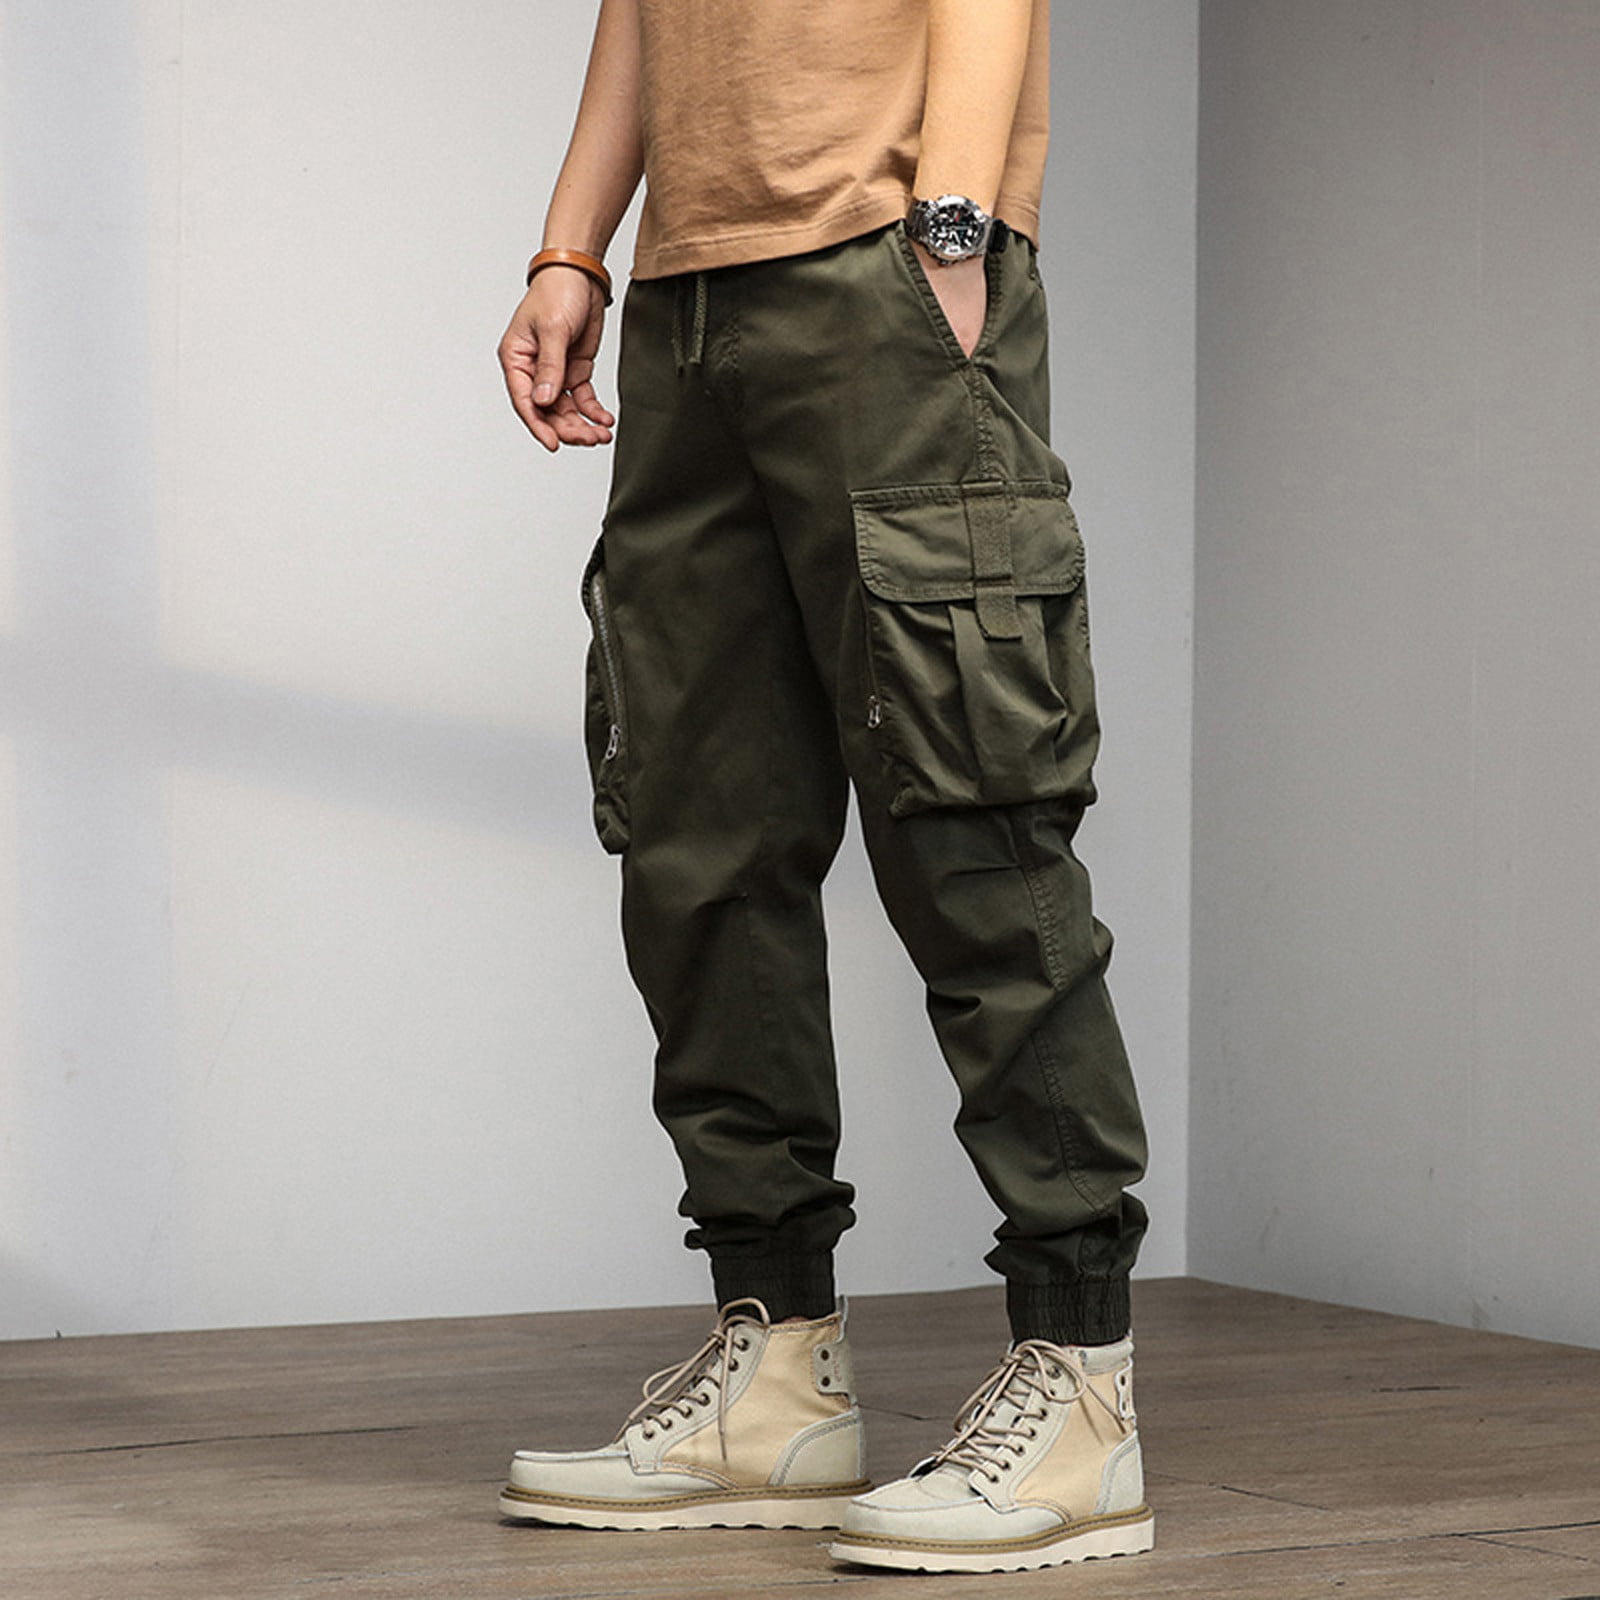 20 Cargo Pants Outfits for Any and All Occasions